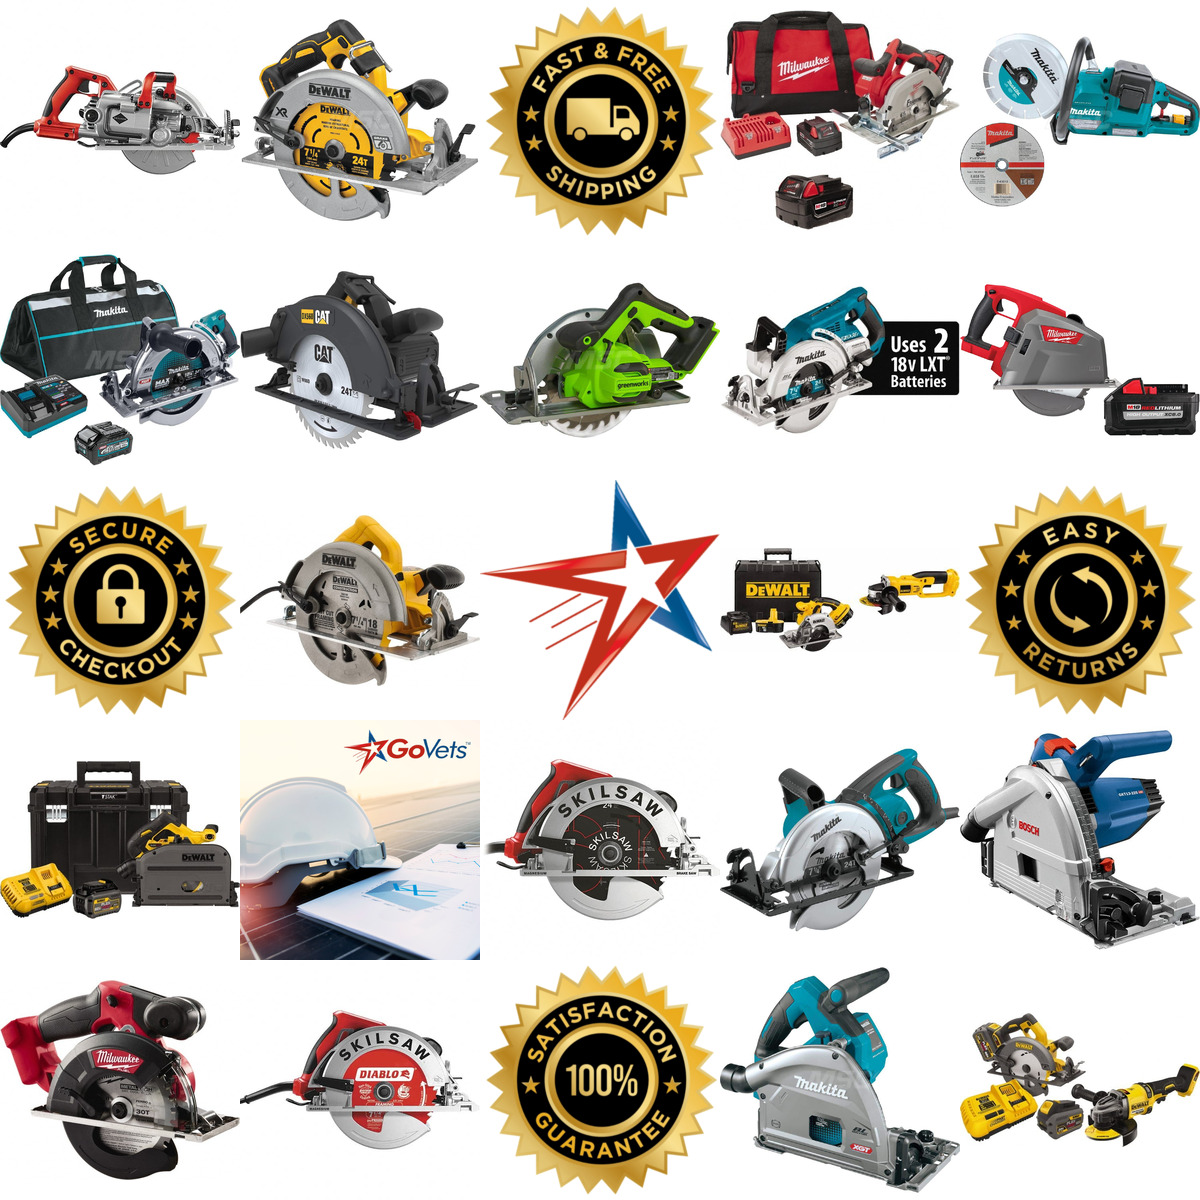 A selection of Circular Saws products on GoVets